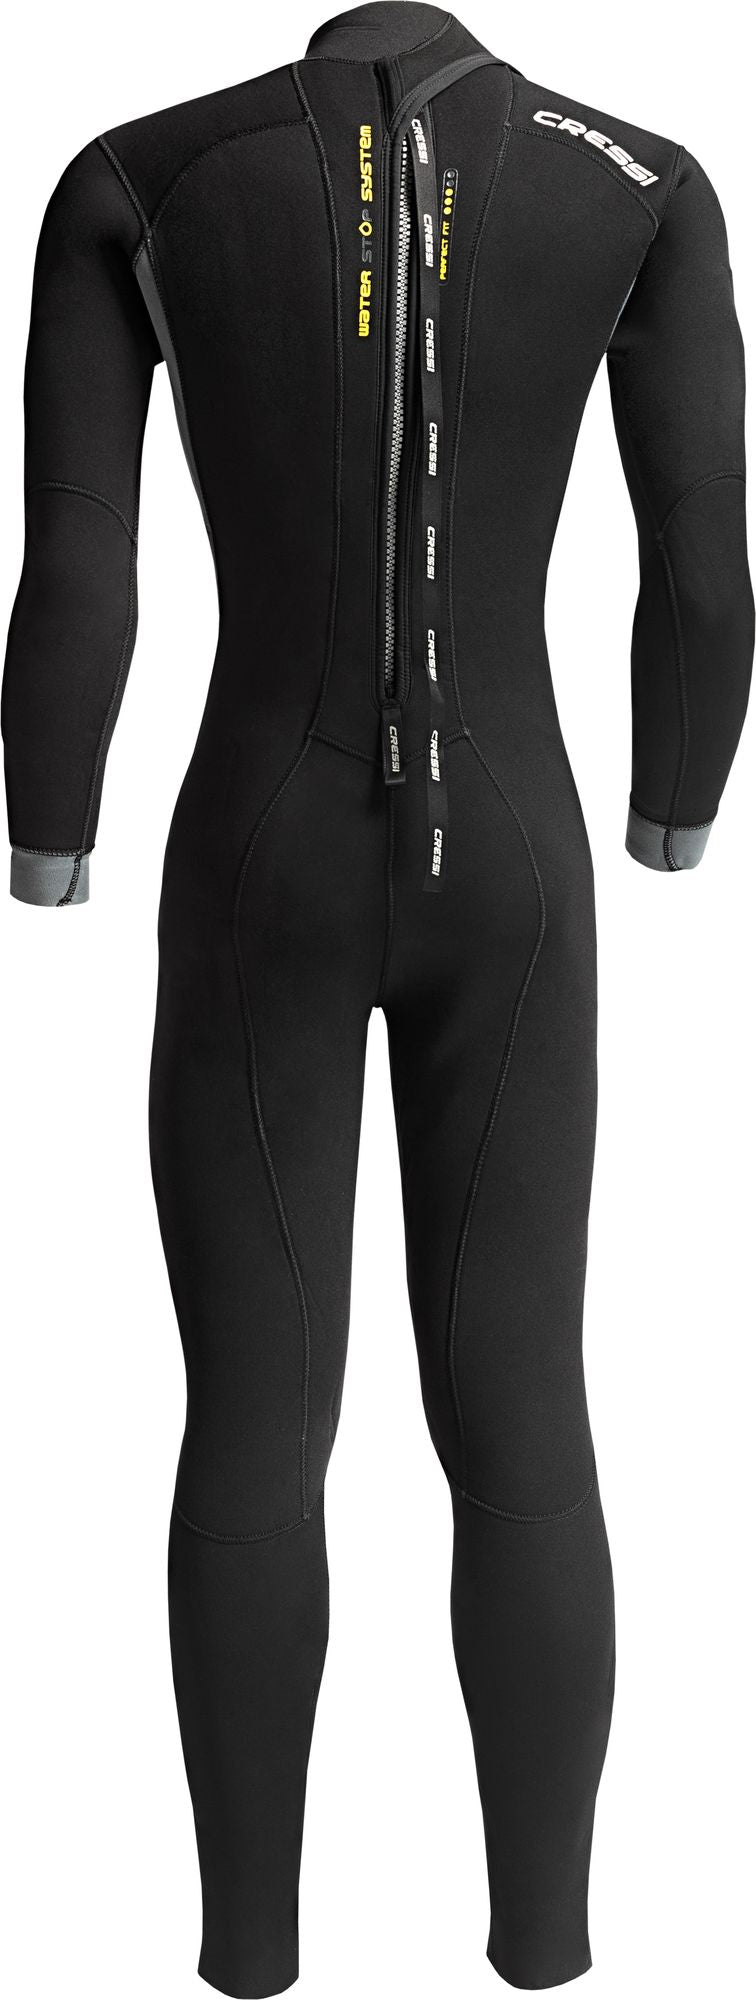 Fast 5mm Wetsuit Man